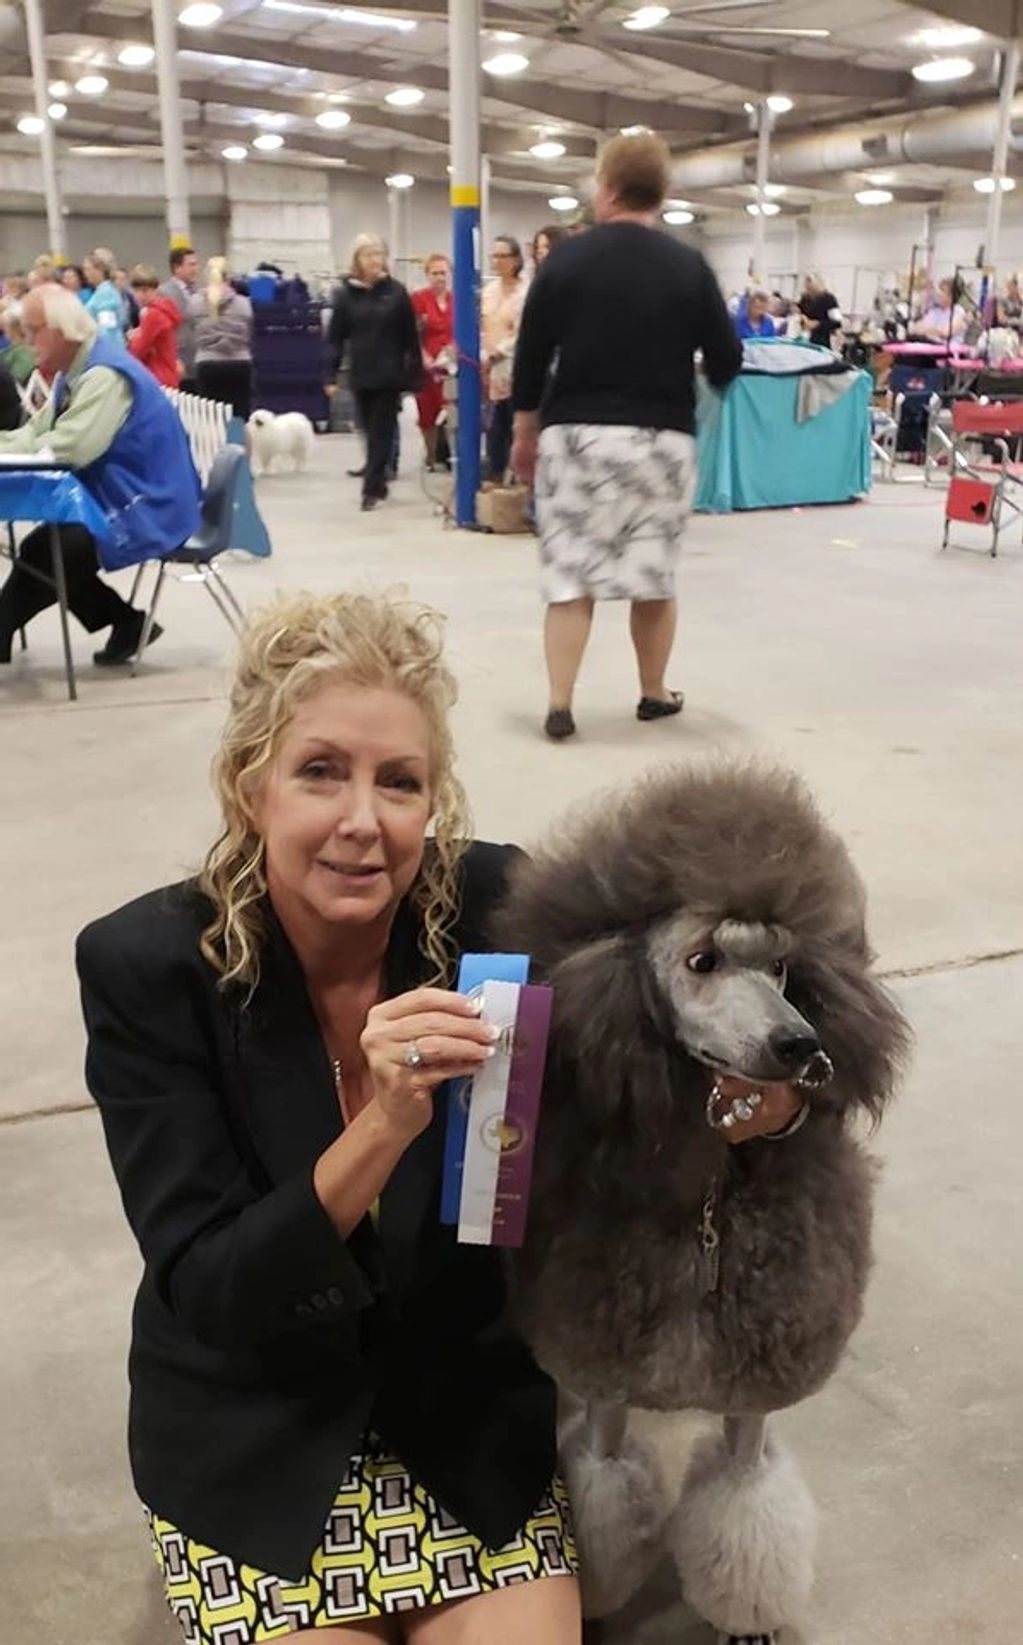 Silver Standard poodle at a dog show
Argan's What Dreams Are Made Of aka Bella